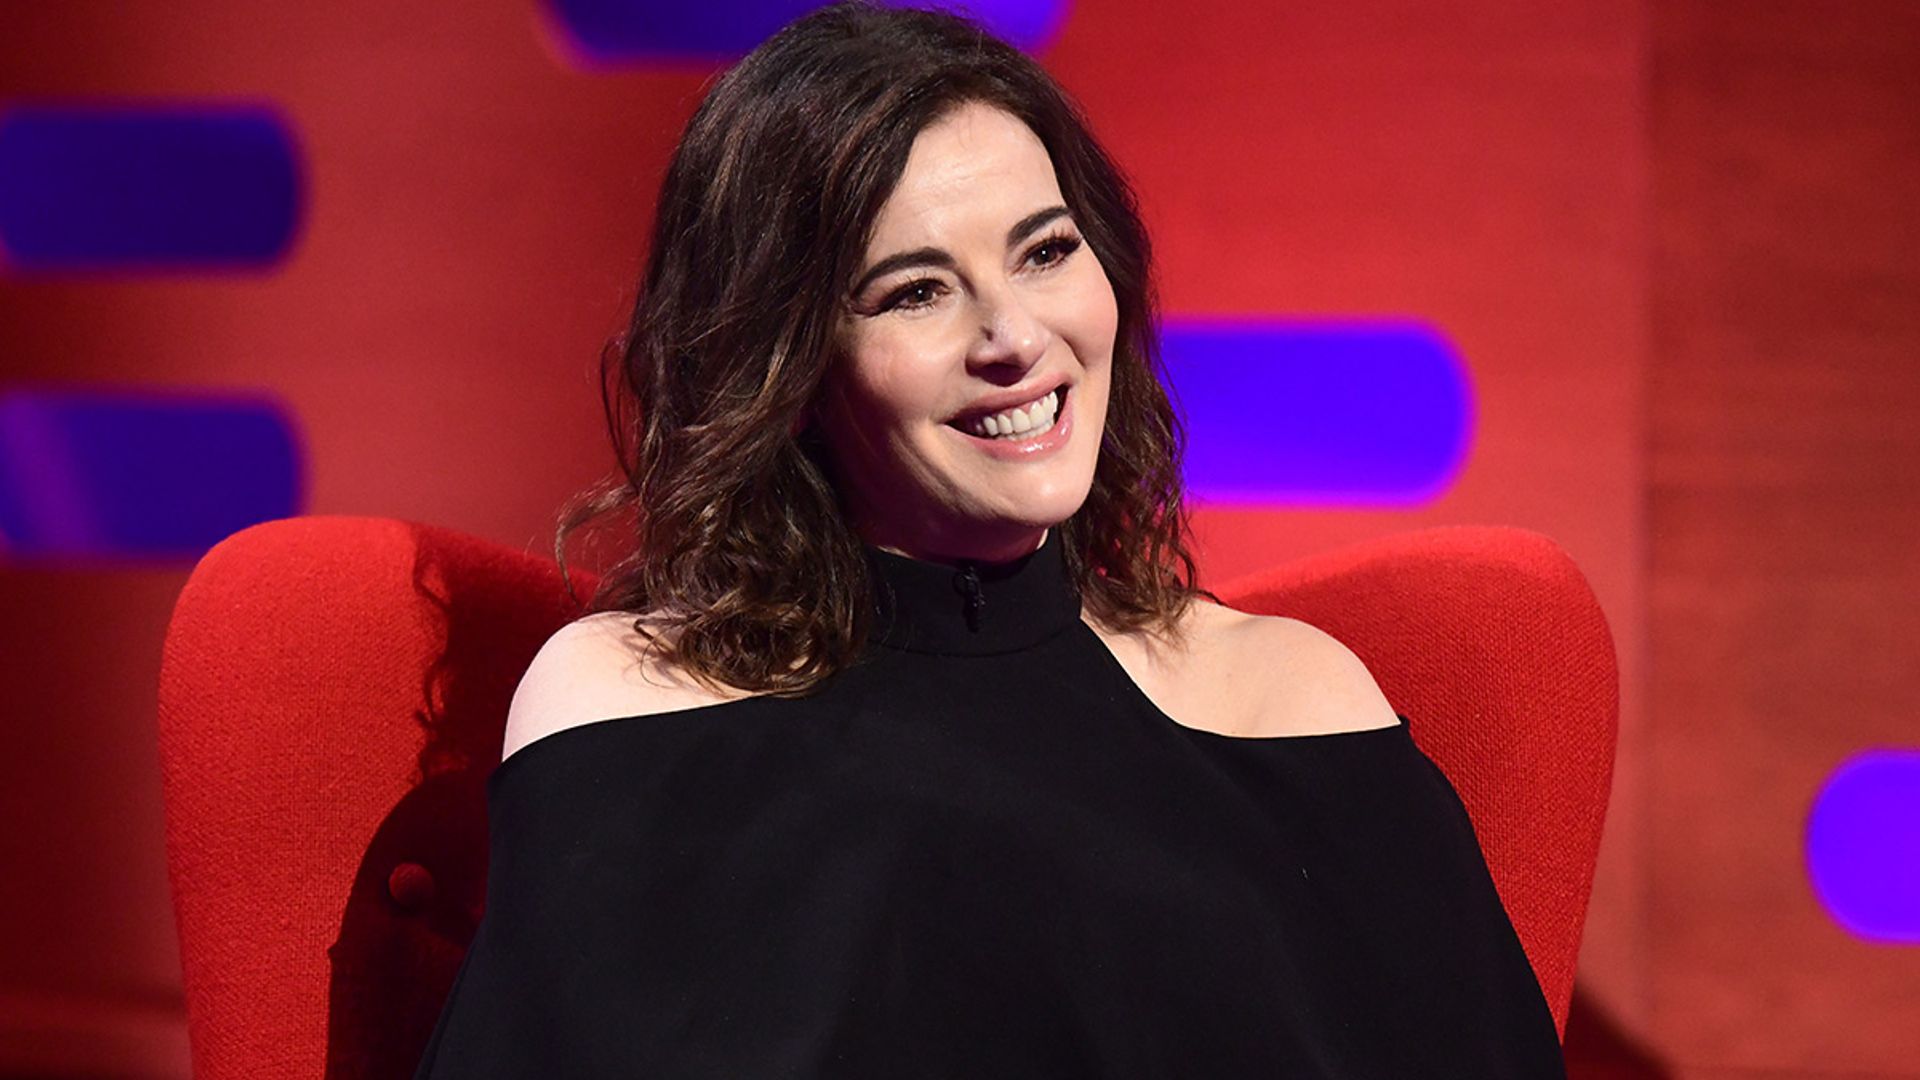 Nigella Lawson's heart-shaped biscuits are the perfect Valentine's Day treat